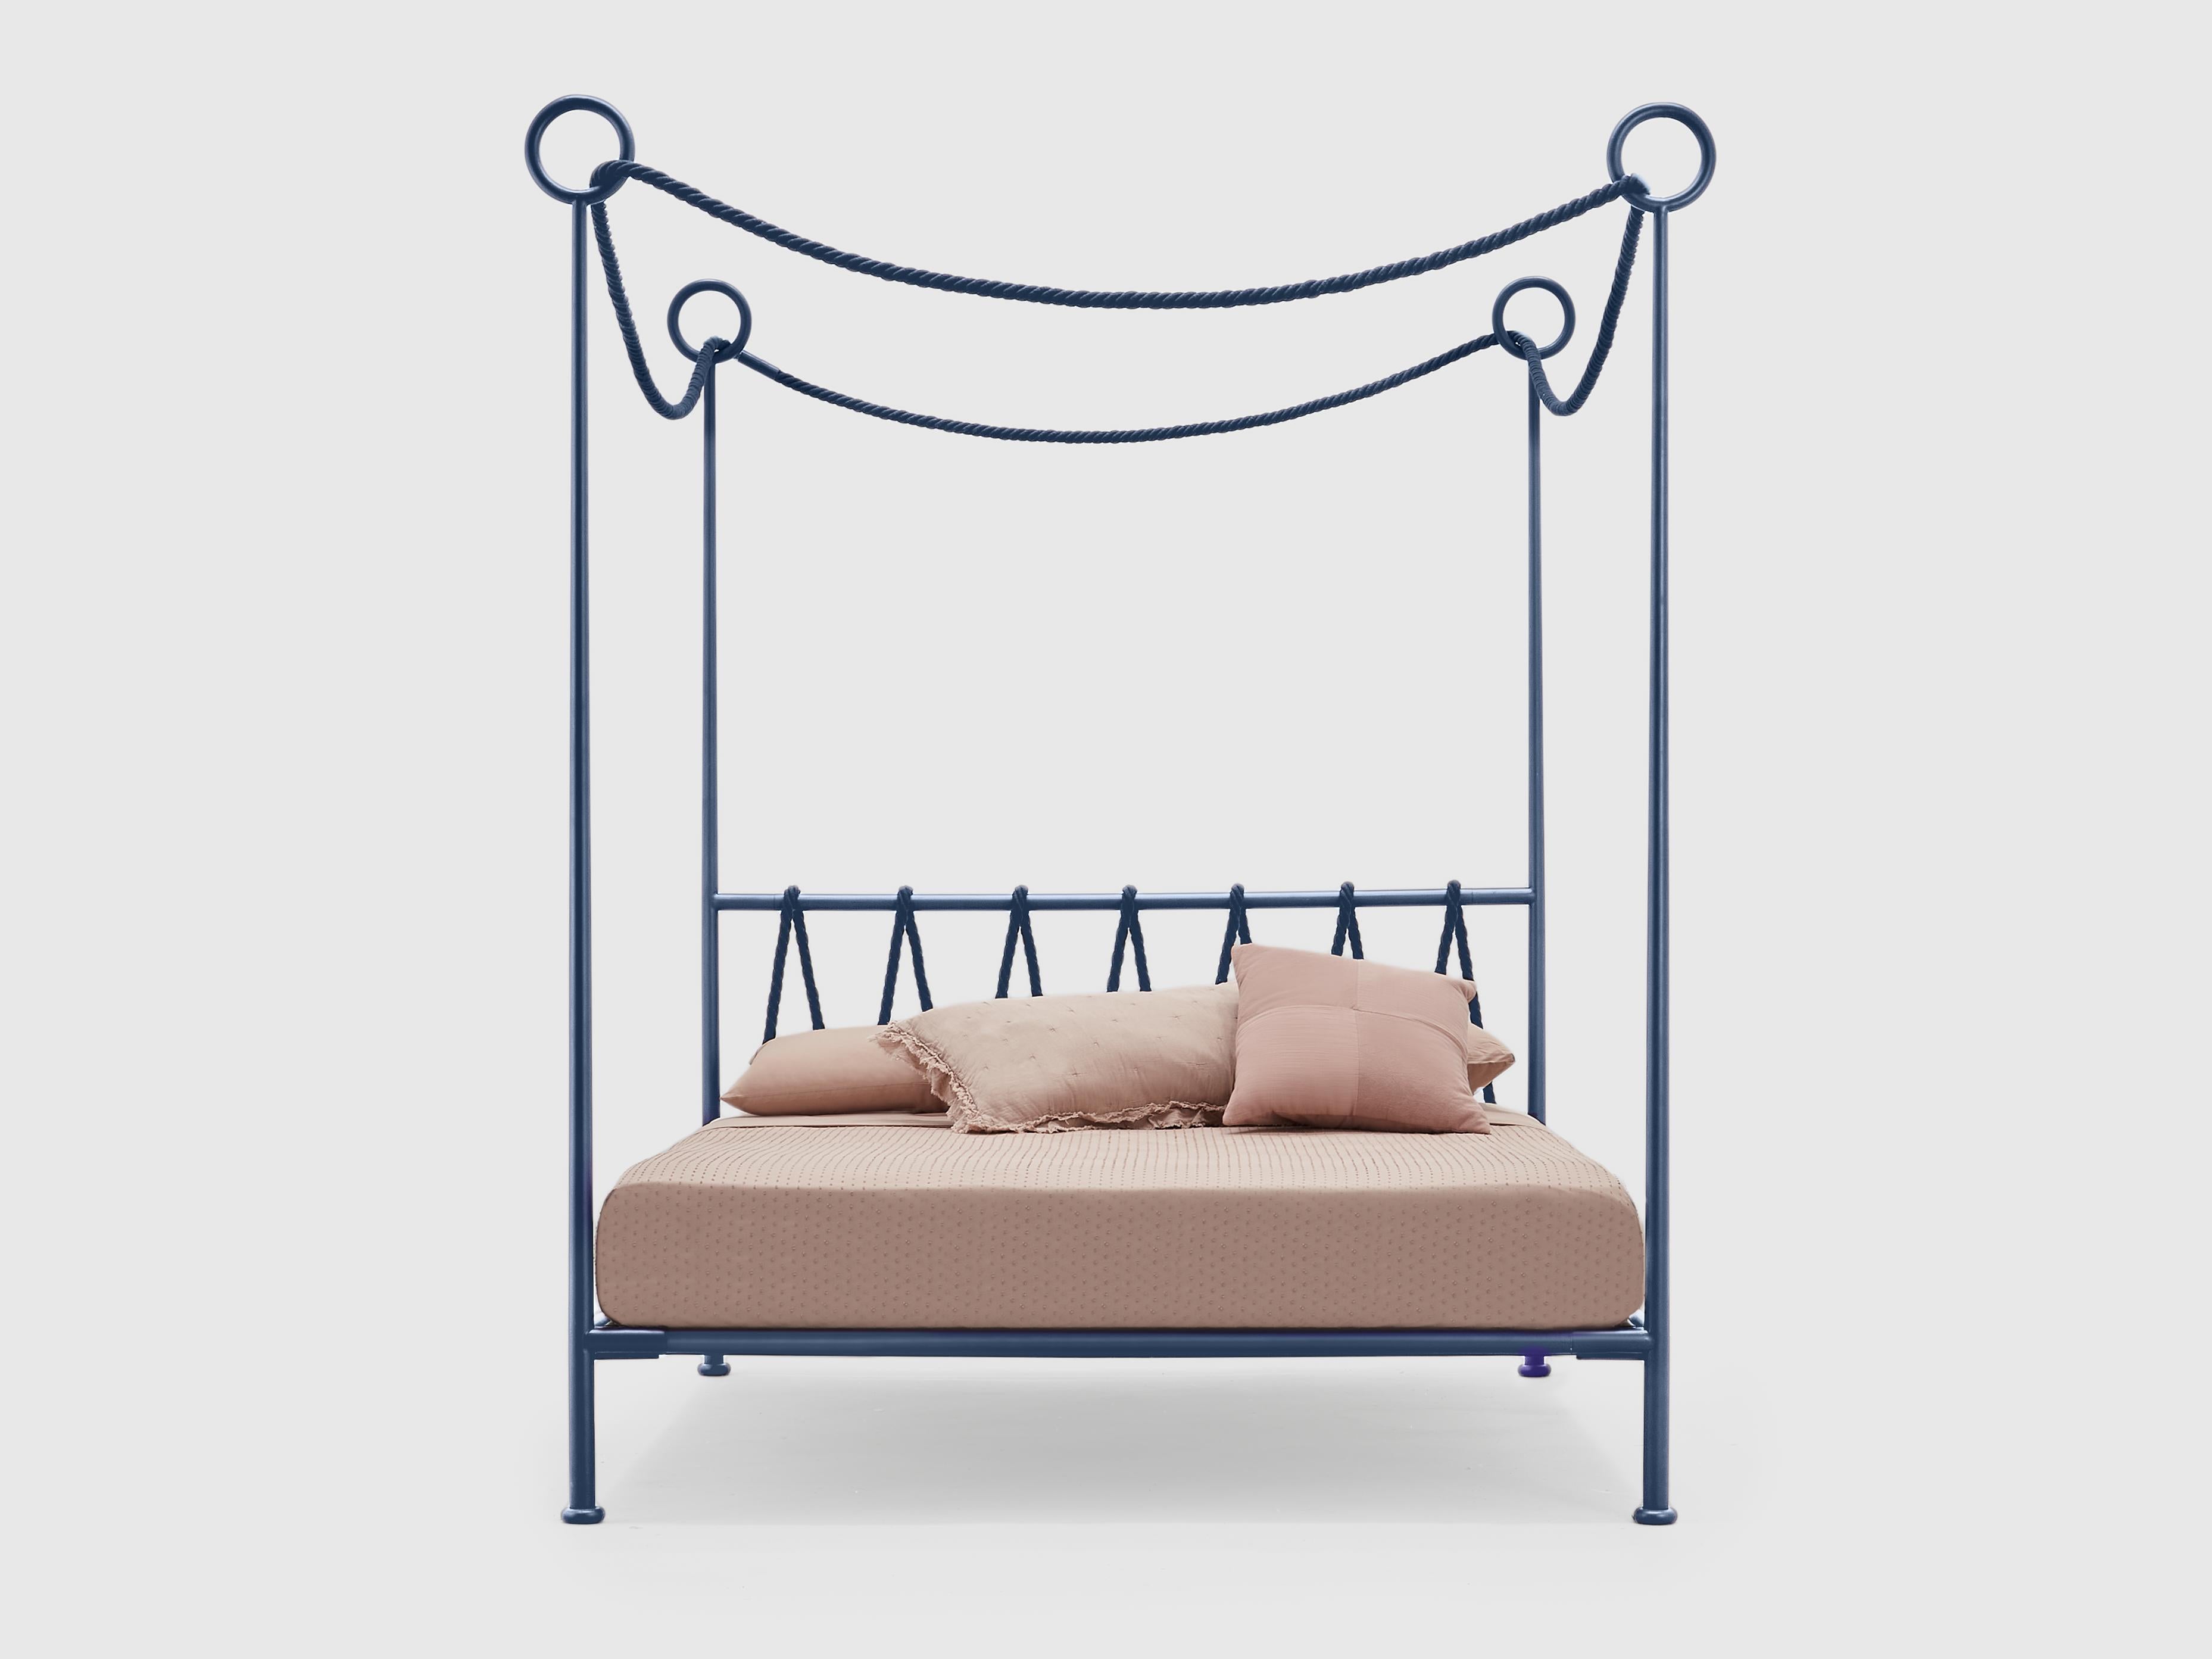 The frame design is elegant and clean. The round wrought iron
profile rises from the foot of the bed, forming the posts and drawing
solid iron circles on their summit, which welcome a soft colored cotton
top. This top elegantly rises above the bed